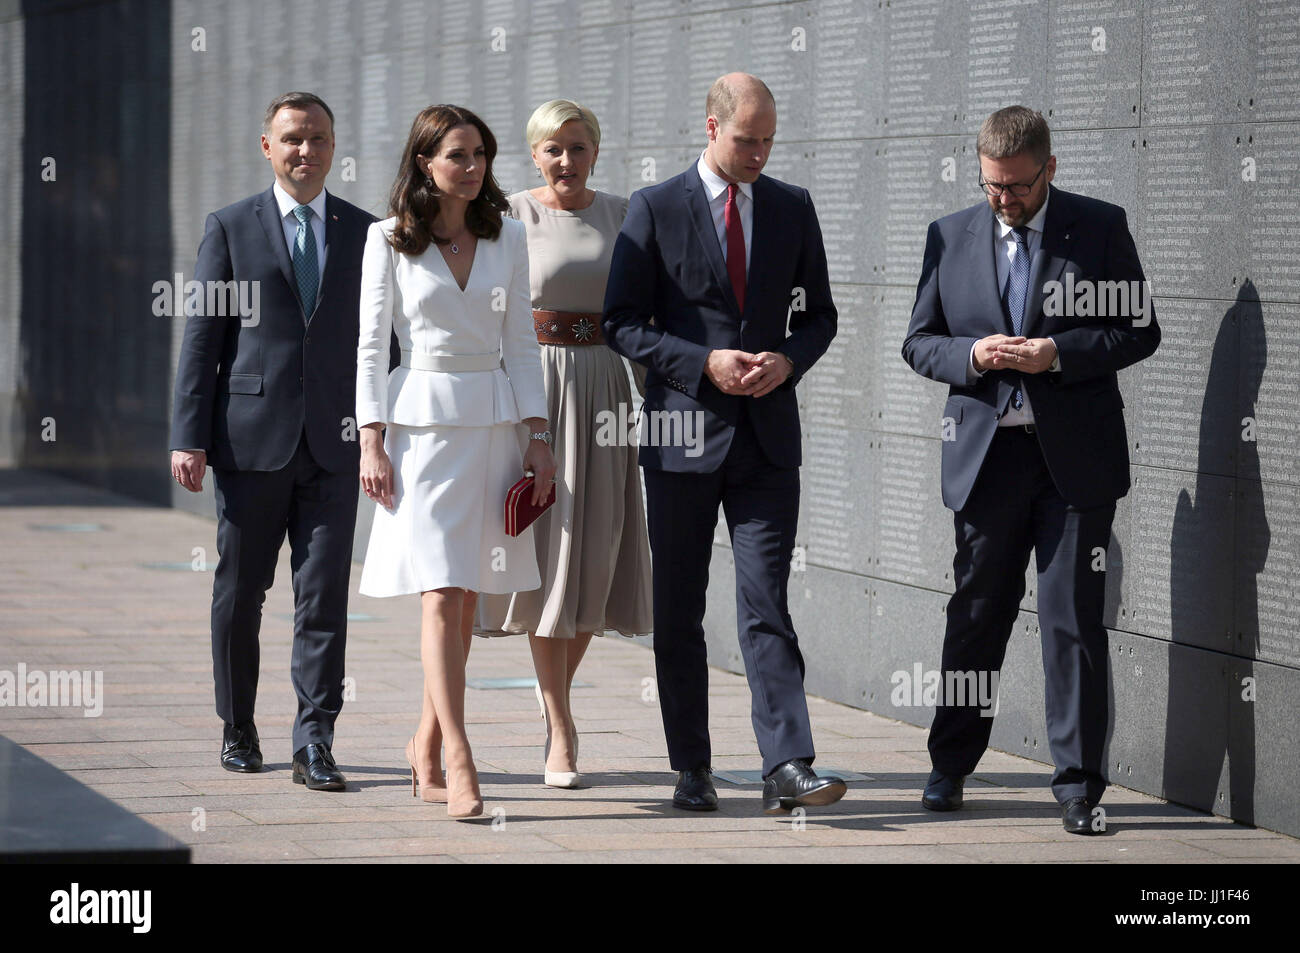 The Duke and Duchess of Cambridge with President Andrzej Duda and his wife, Agata, walking along the Wall of Remembrance as they visit the Warsaw Rising Museum which is dedicated to the uprising of 1944 which saw the Polish resistance Home Army attempt to liberate Warsaw from German occupation, as part of their five-day tour of Poland and Germany. Stock Photo